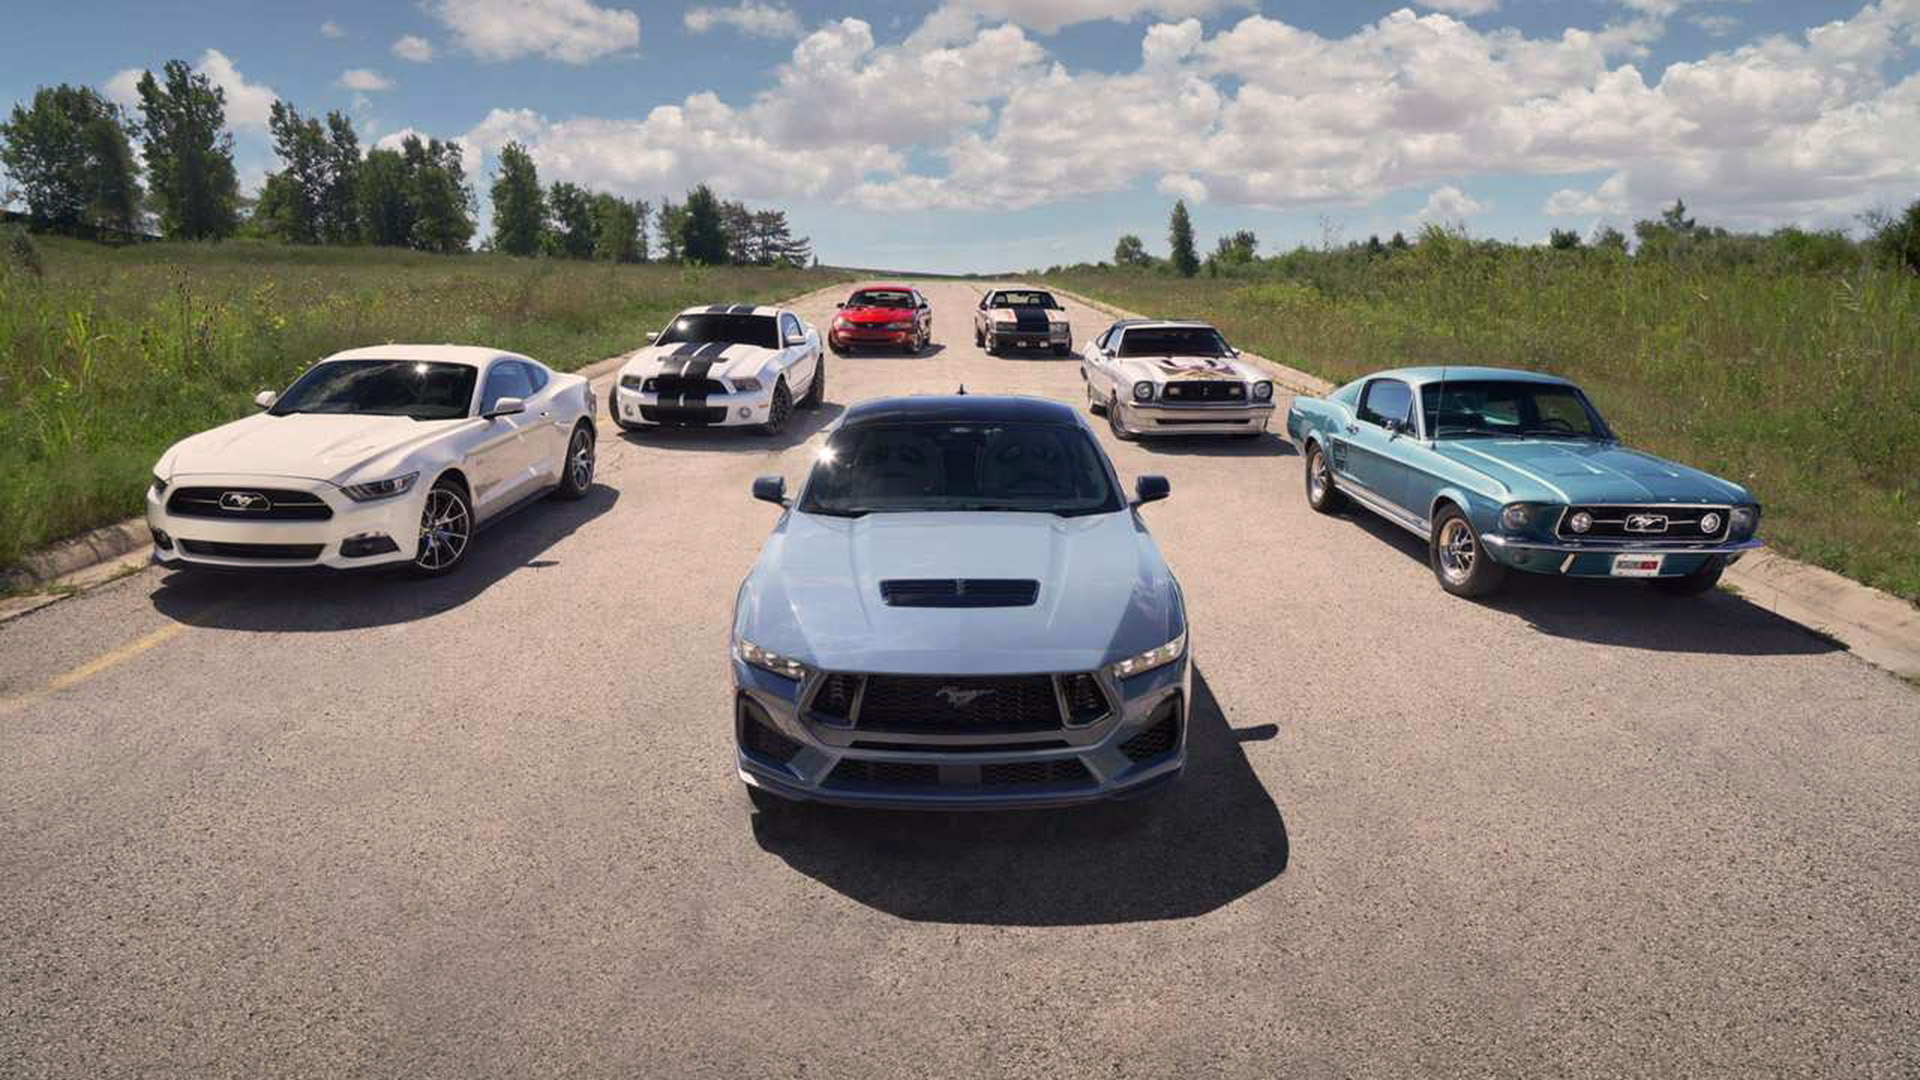 All Mustangs in one photo.  Almost 60 years since the classic pony car concept originated, cars weren't as big as the muscle cars of the 60s.